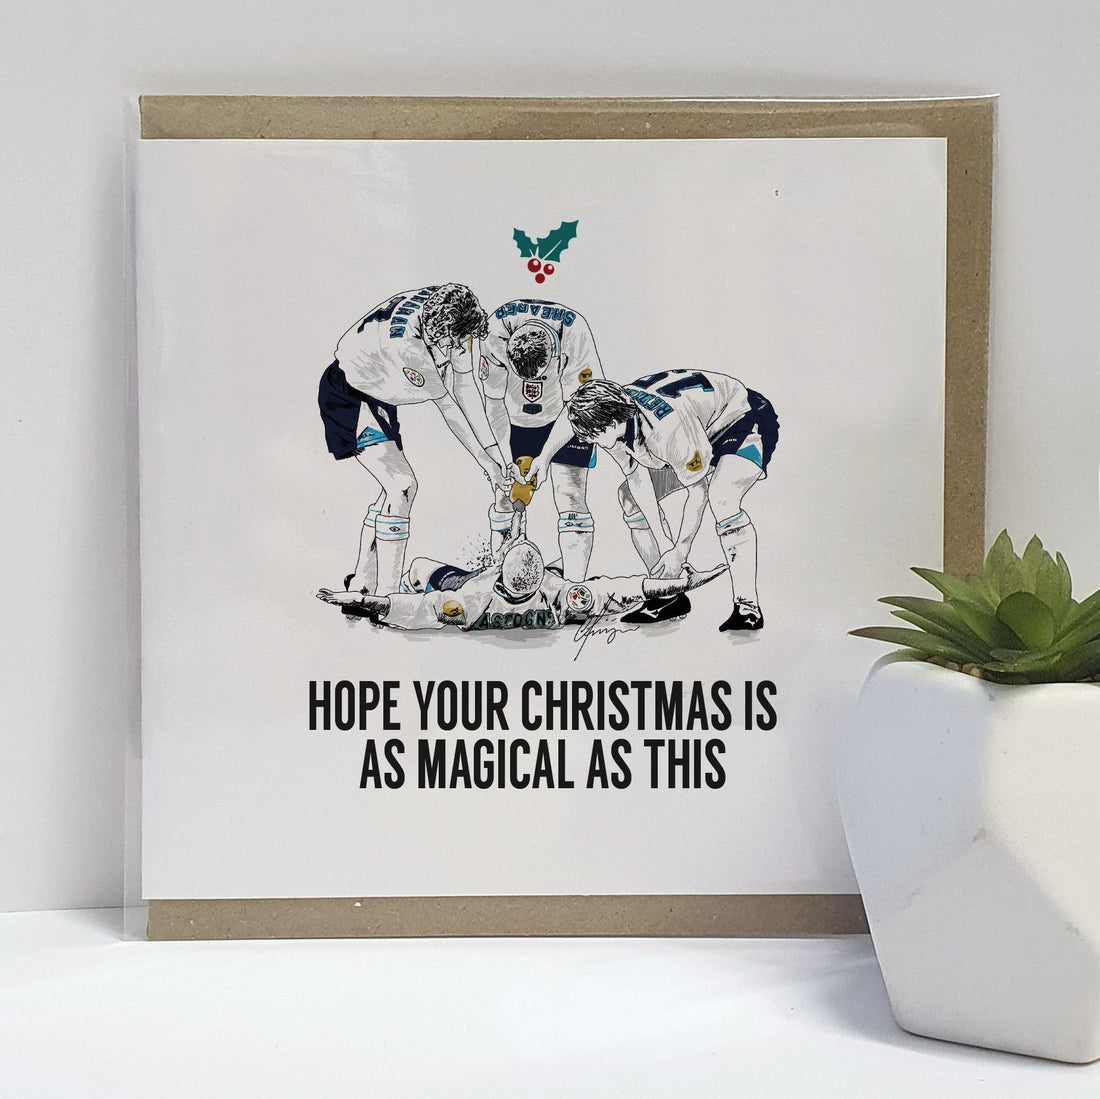 Euro 96 celebratory Christmas card.  Card reads:  I hope your Christmas is as magical as this. Featuring an illustration of the England  football team celebrating Paul Gascoigne's goal with the famous dentist chair).